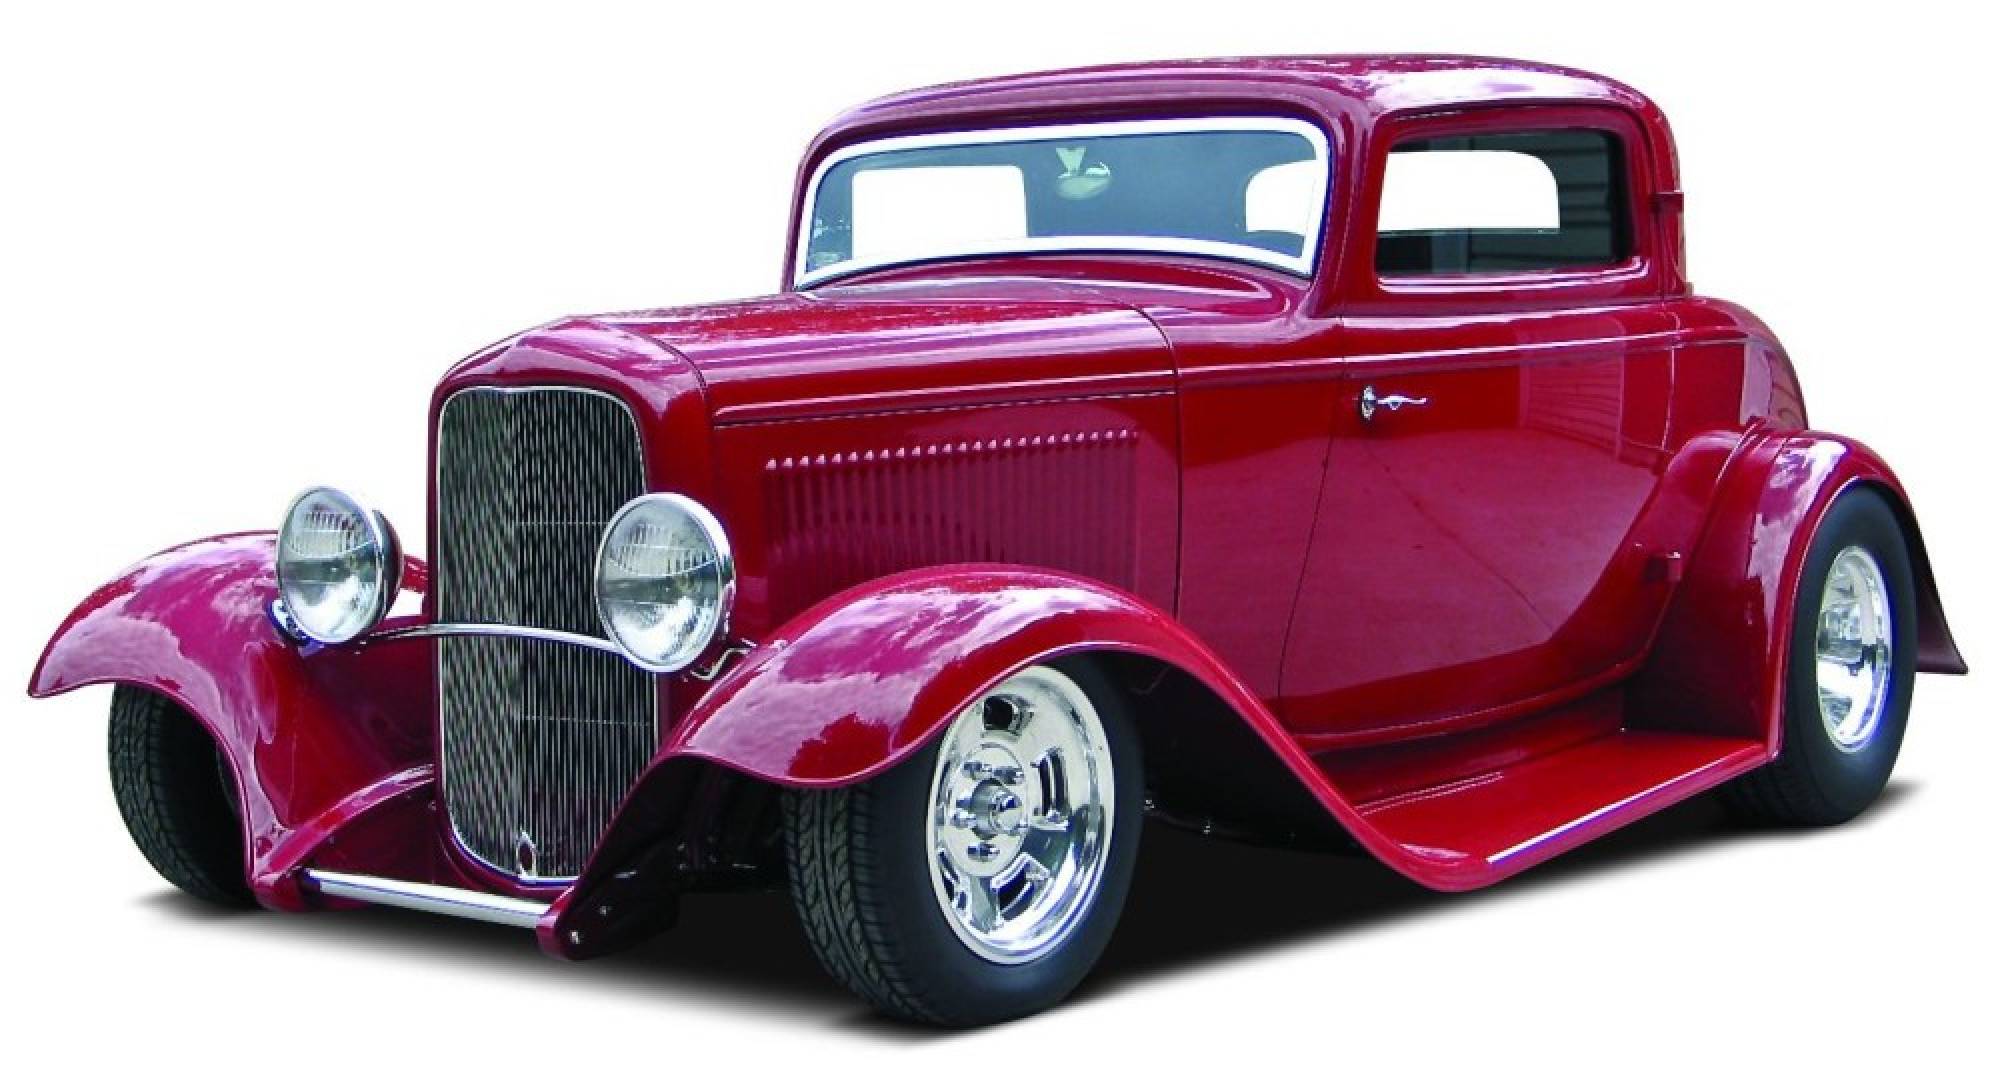 1932 Ford Coupe Backgrounds, Compatible - PC, Mobile, Gadgets| 2000x1086 px